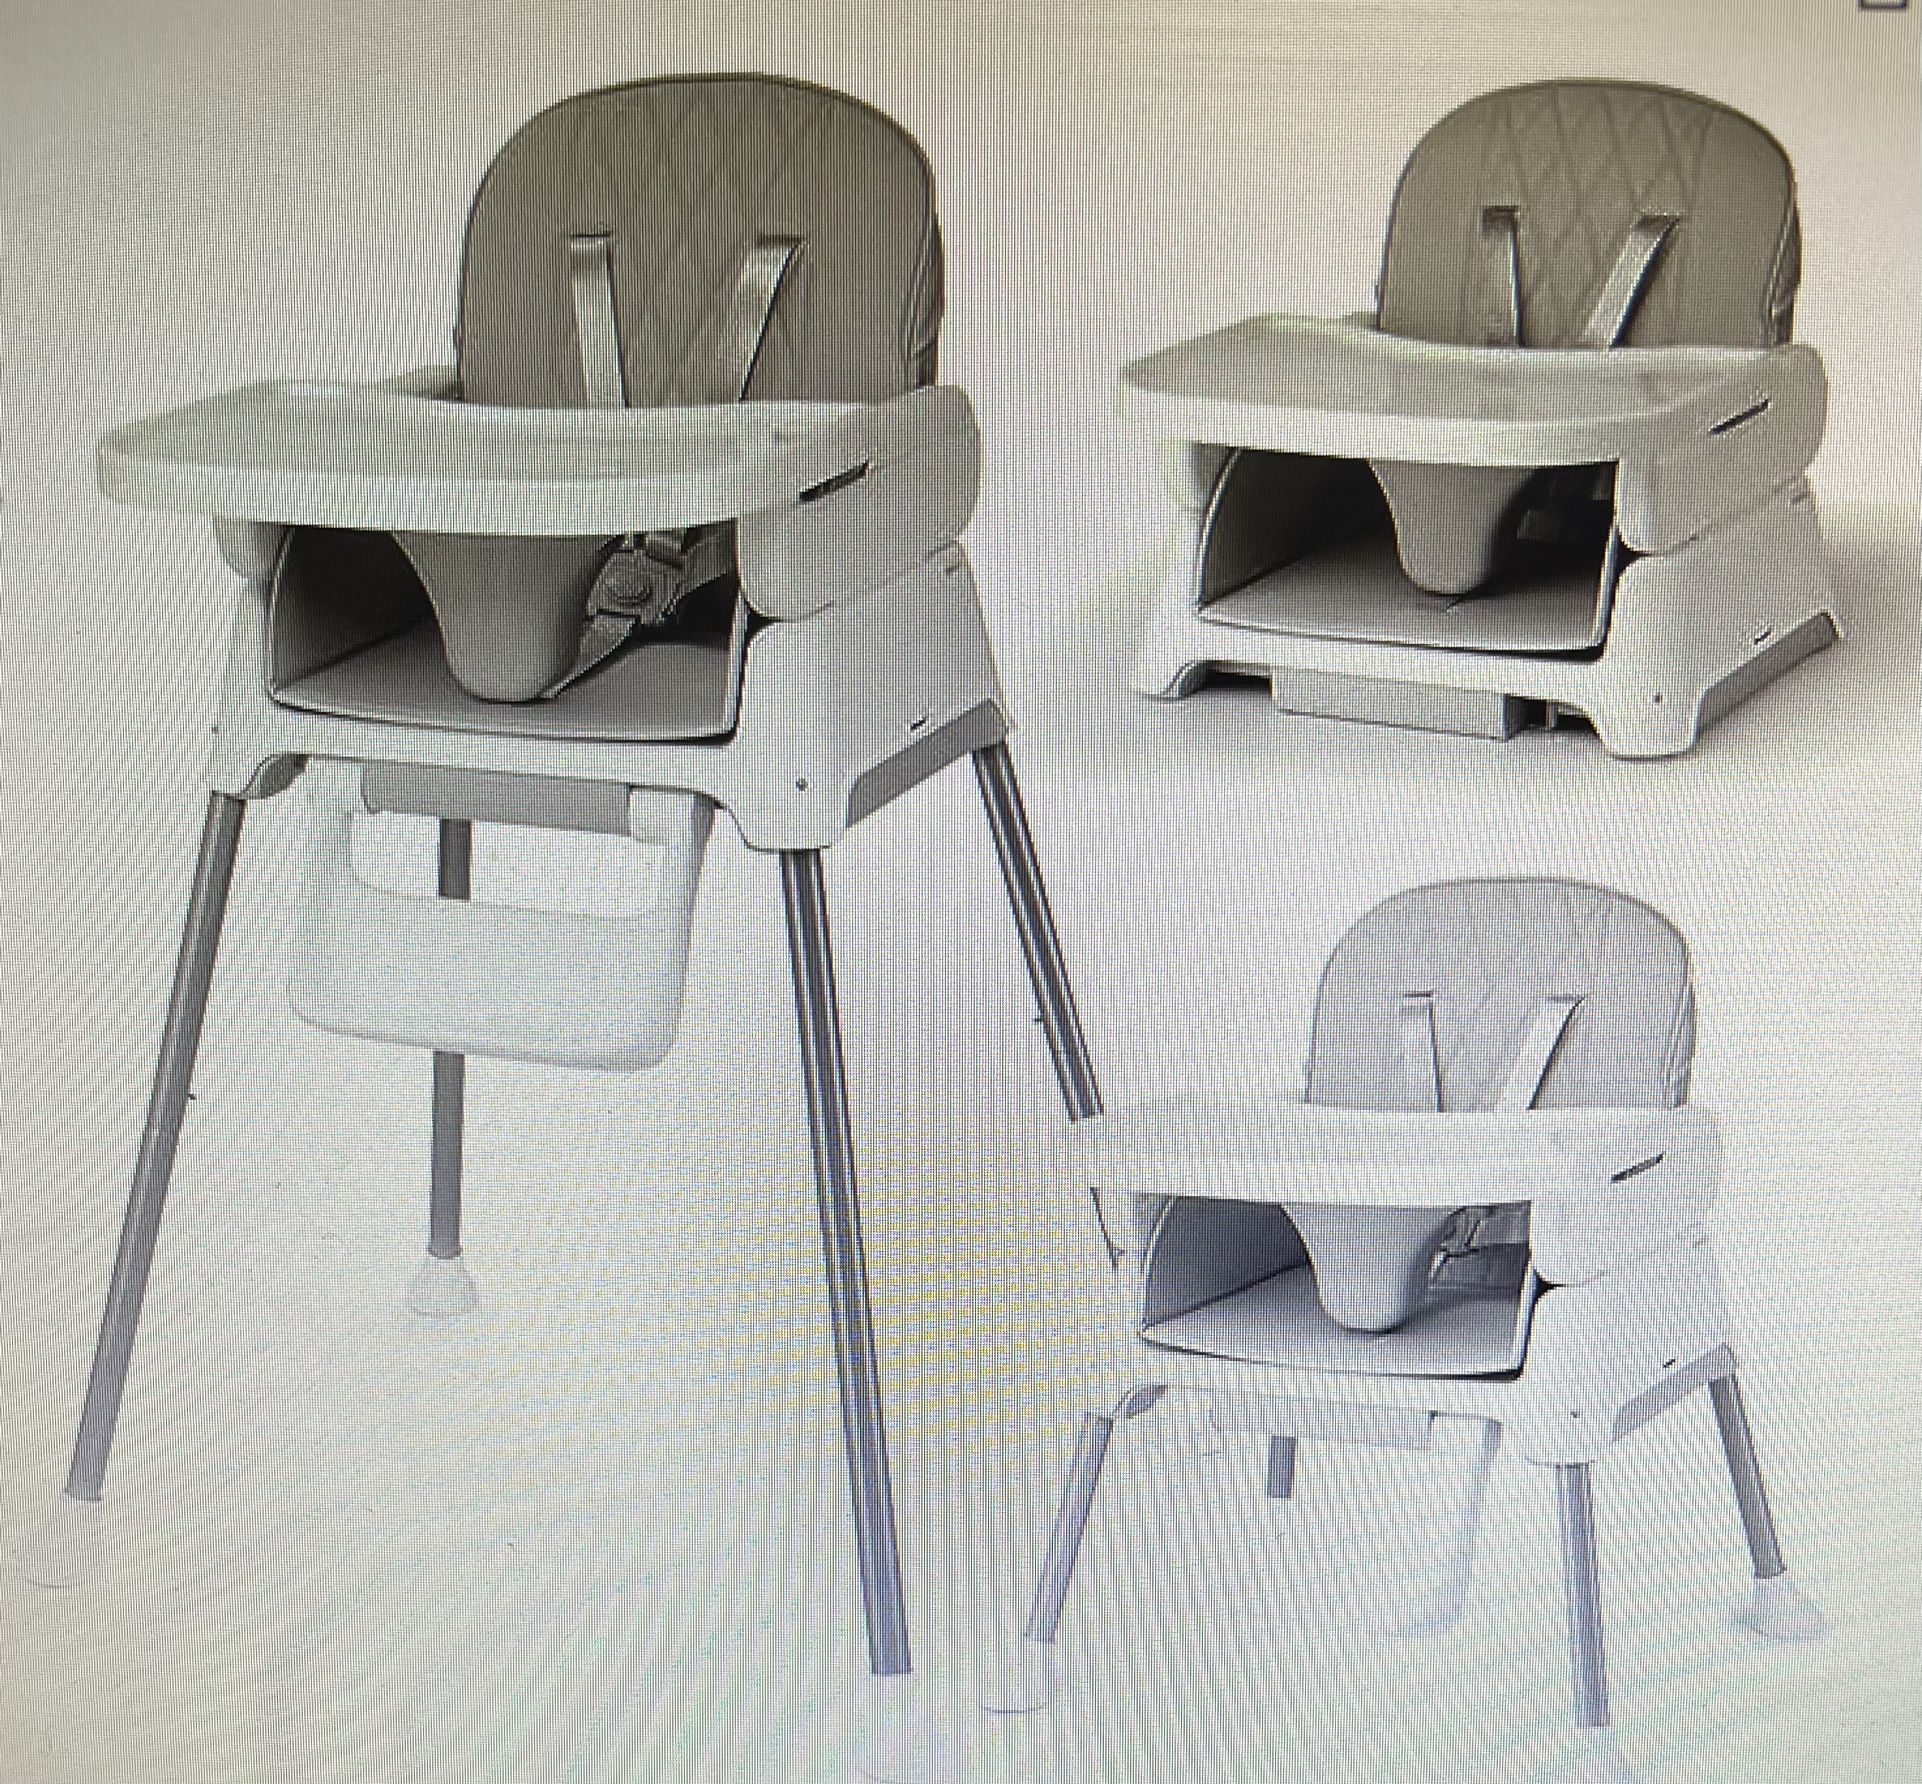 3 In 1 Baby  High Chair